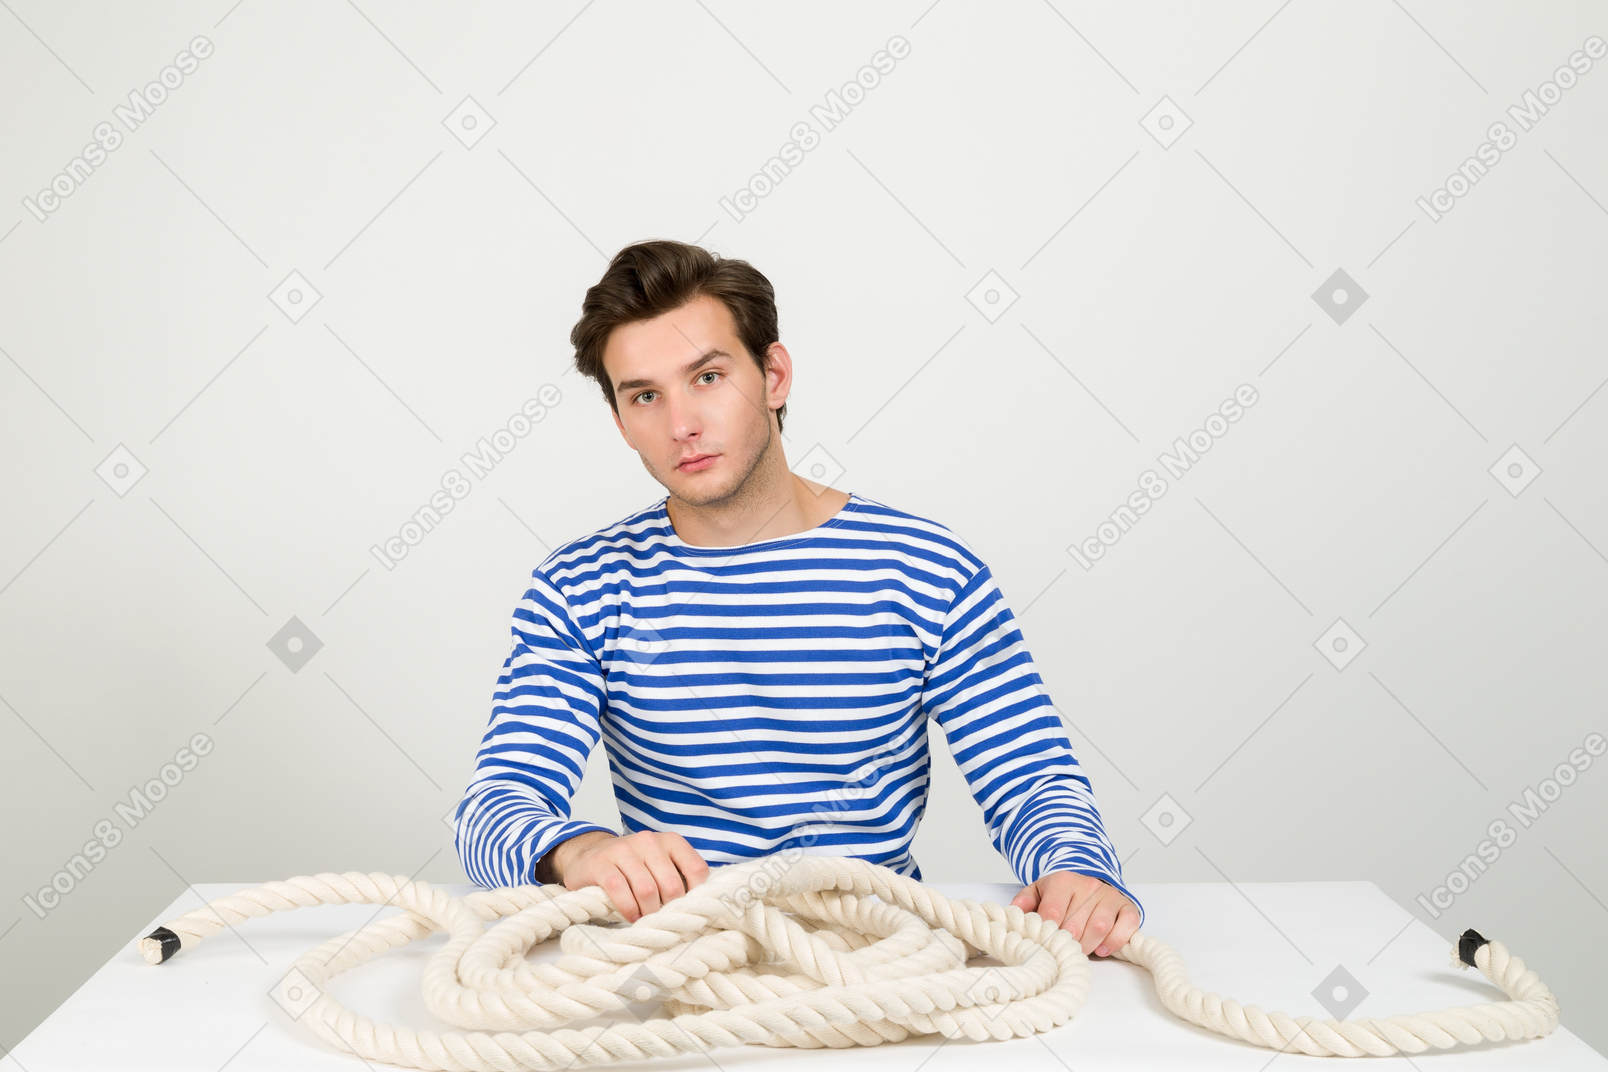 Sailor sitting at the table with rope on it